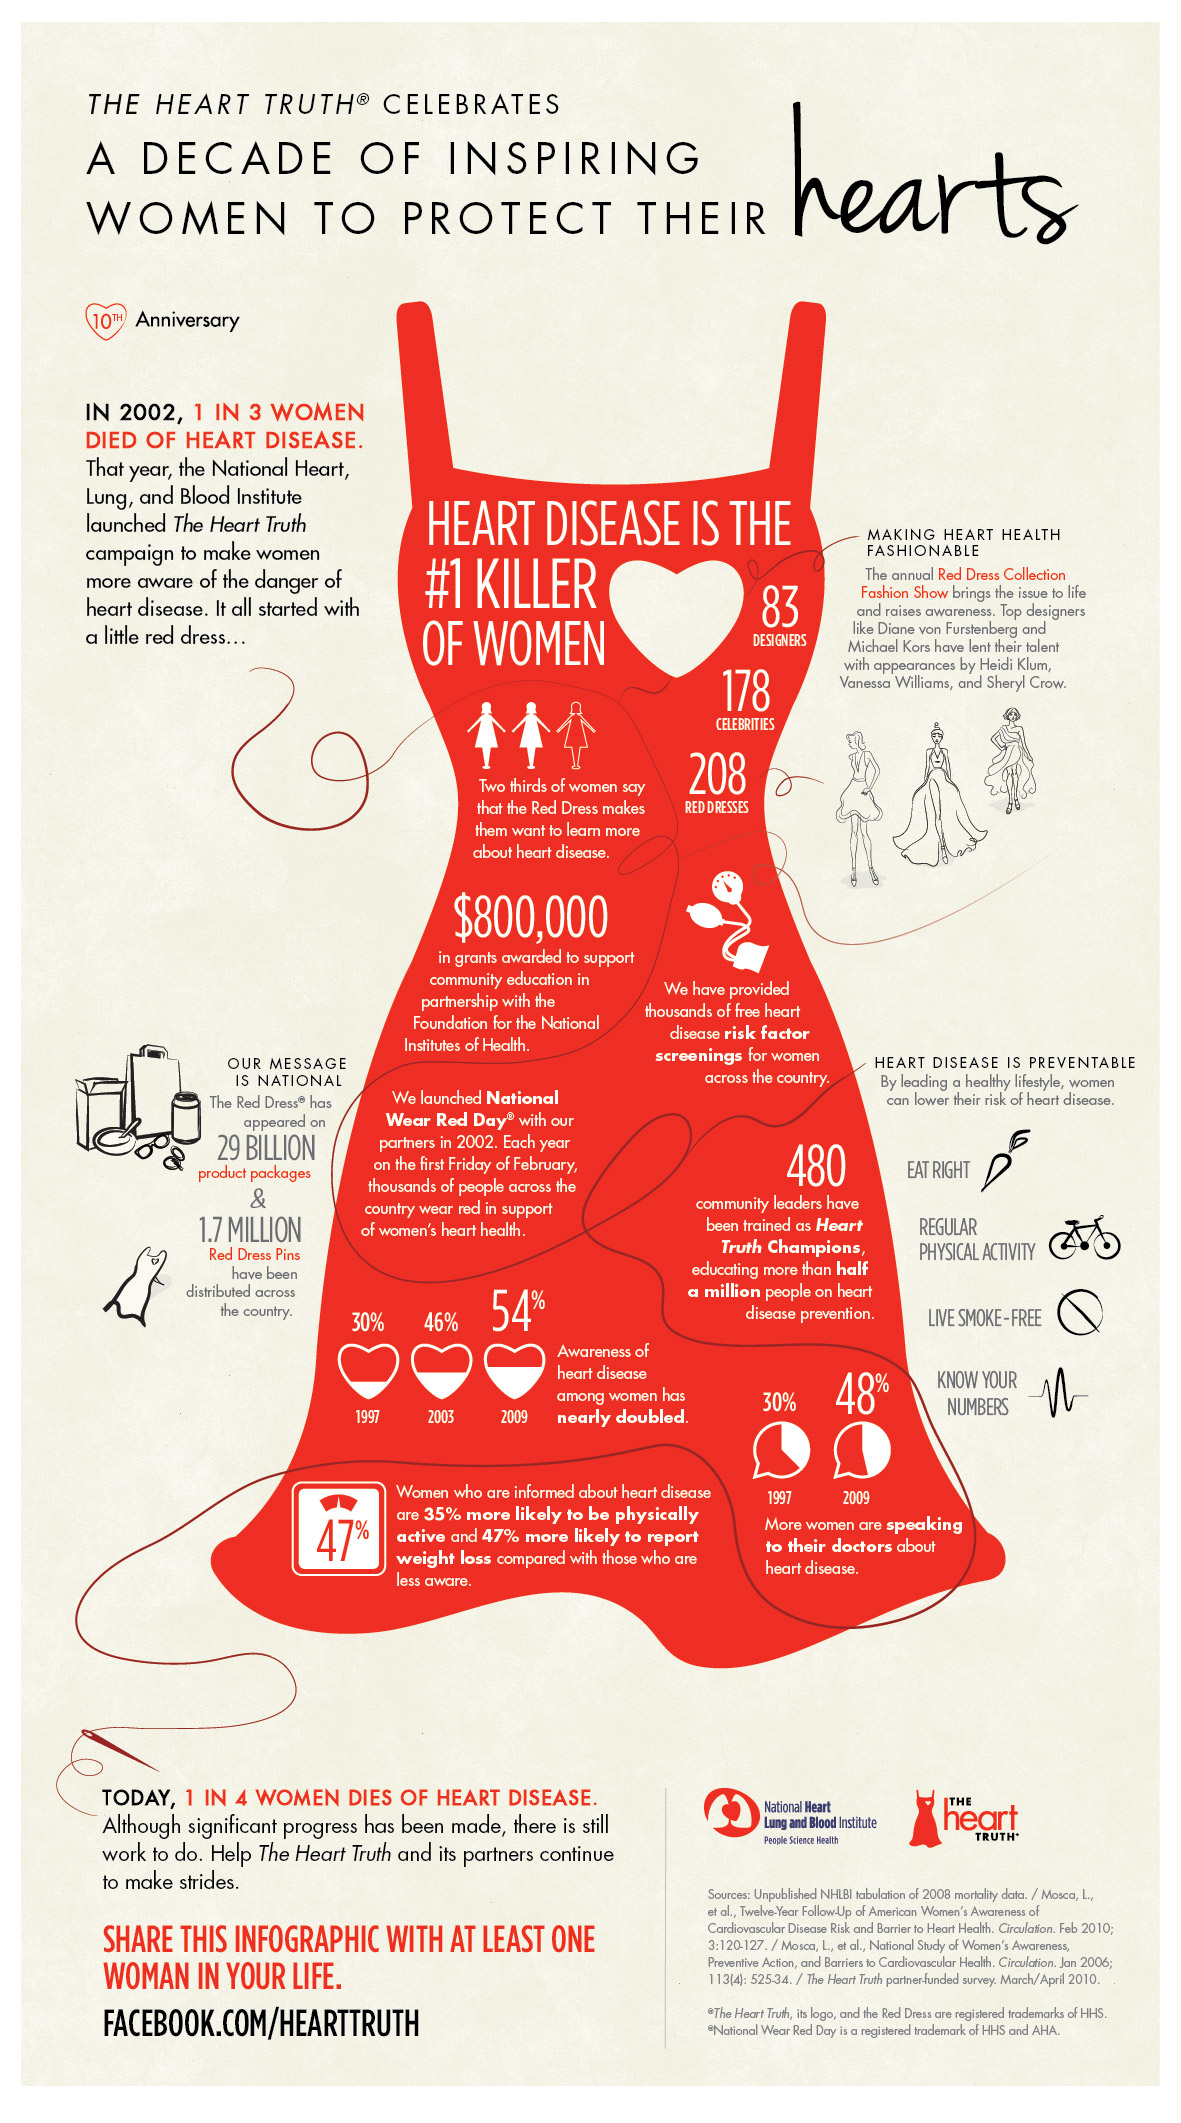 THT_10thAnniversary_Infographic-forweb-large